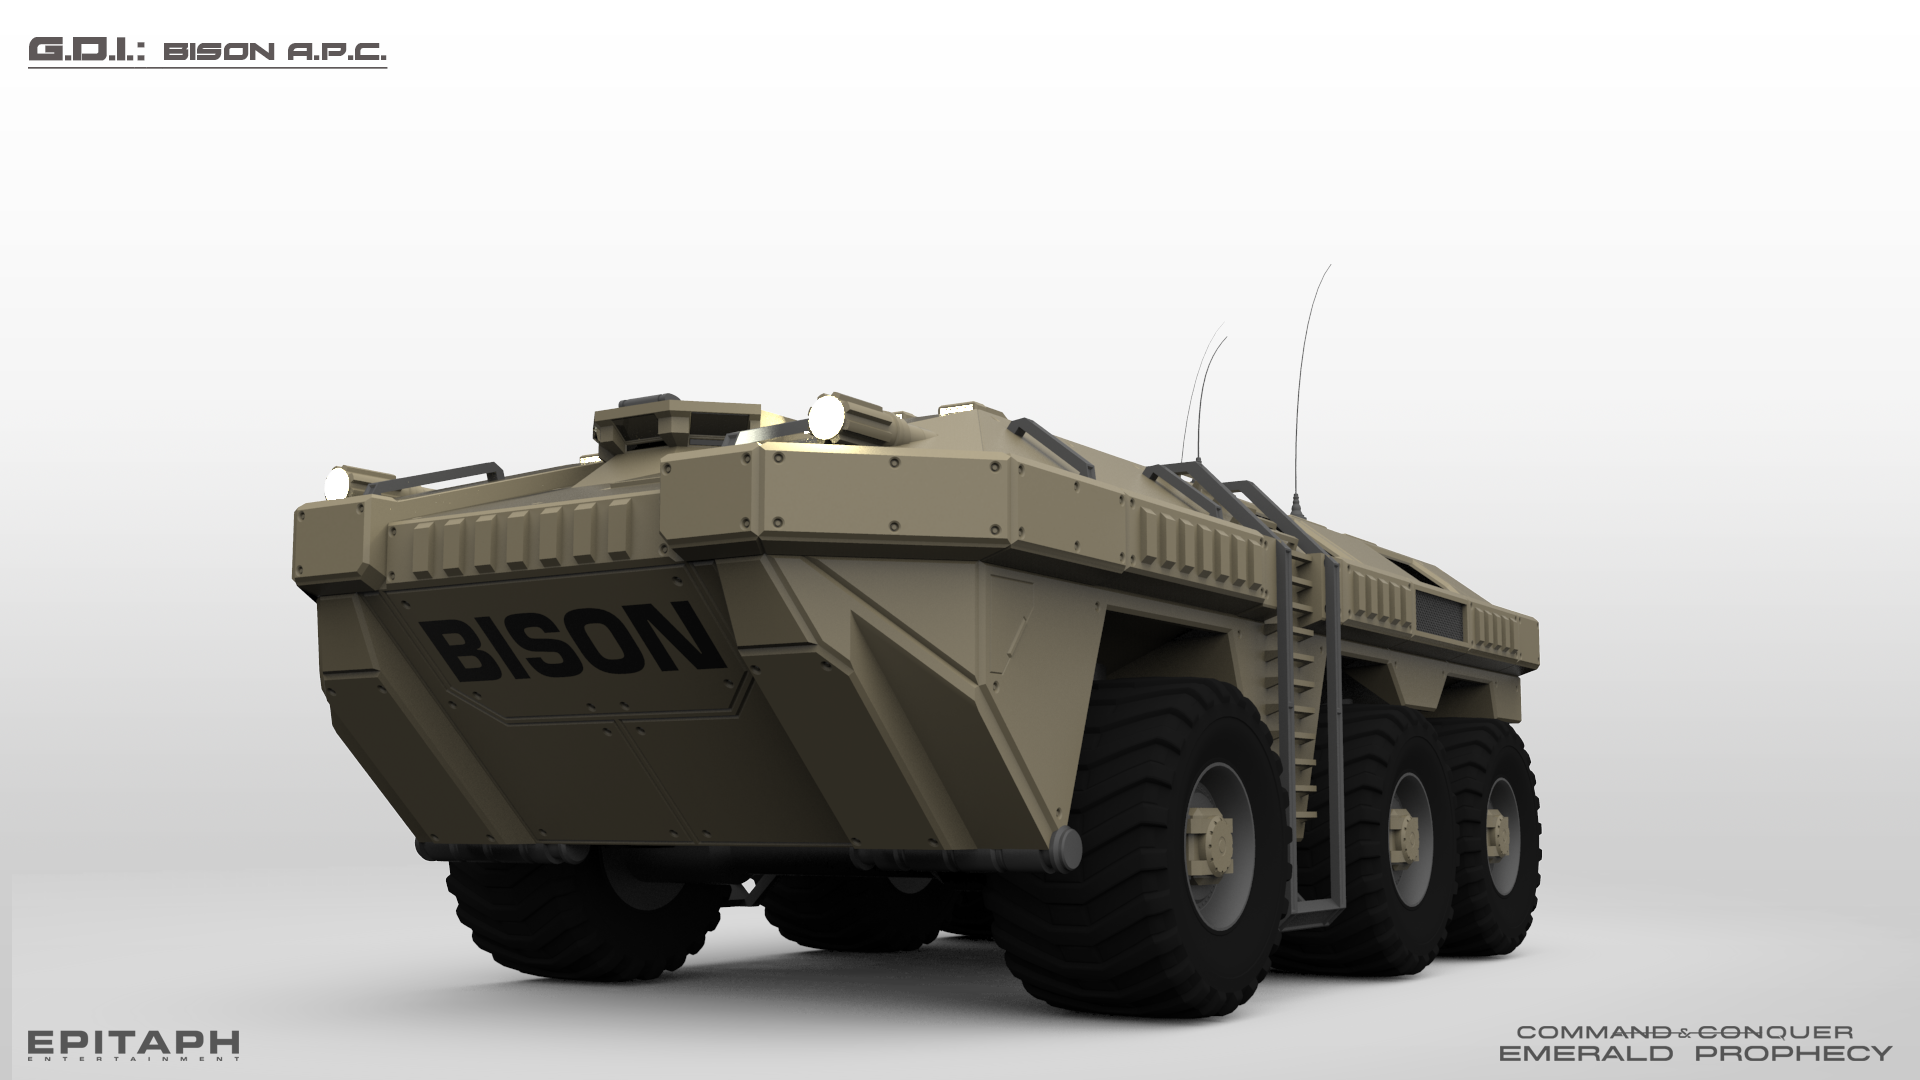 Bison APC (WIP) image - Command & Conquer: Emerald Prophecy mod for ...